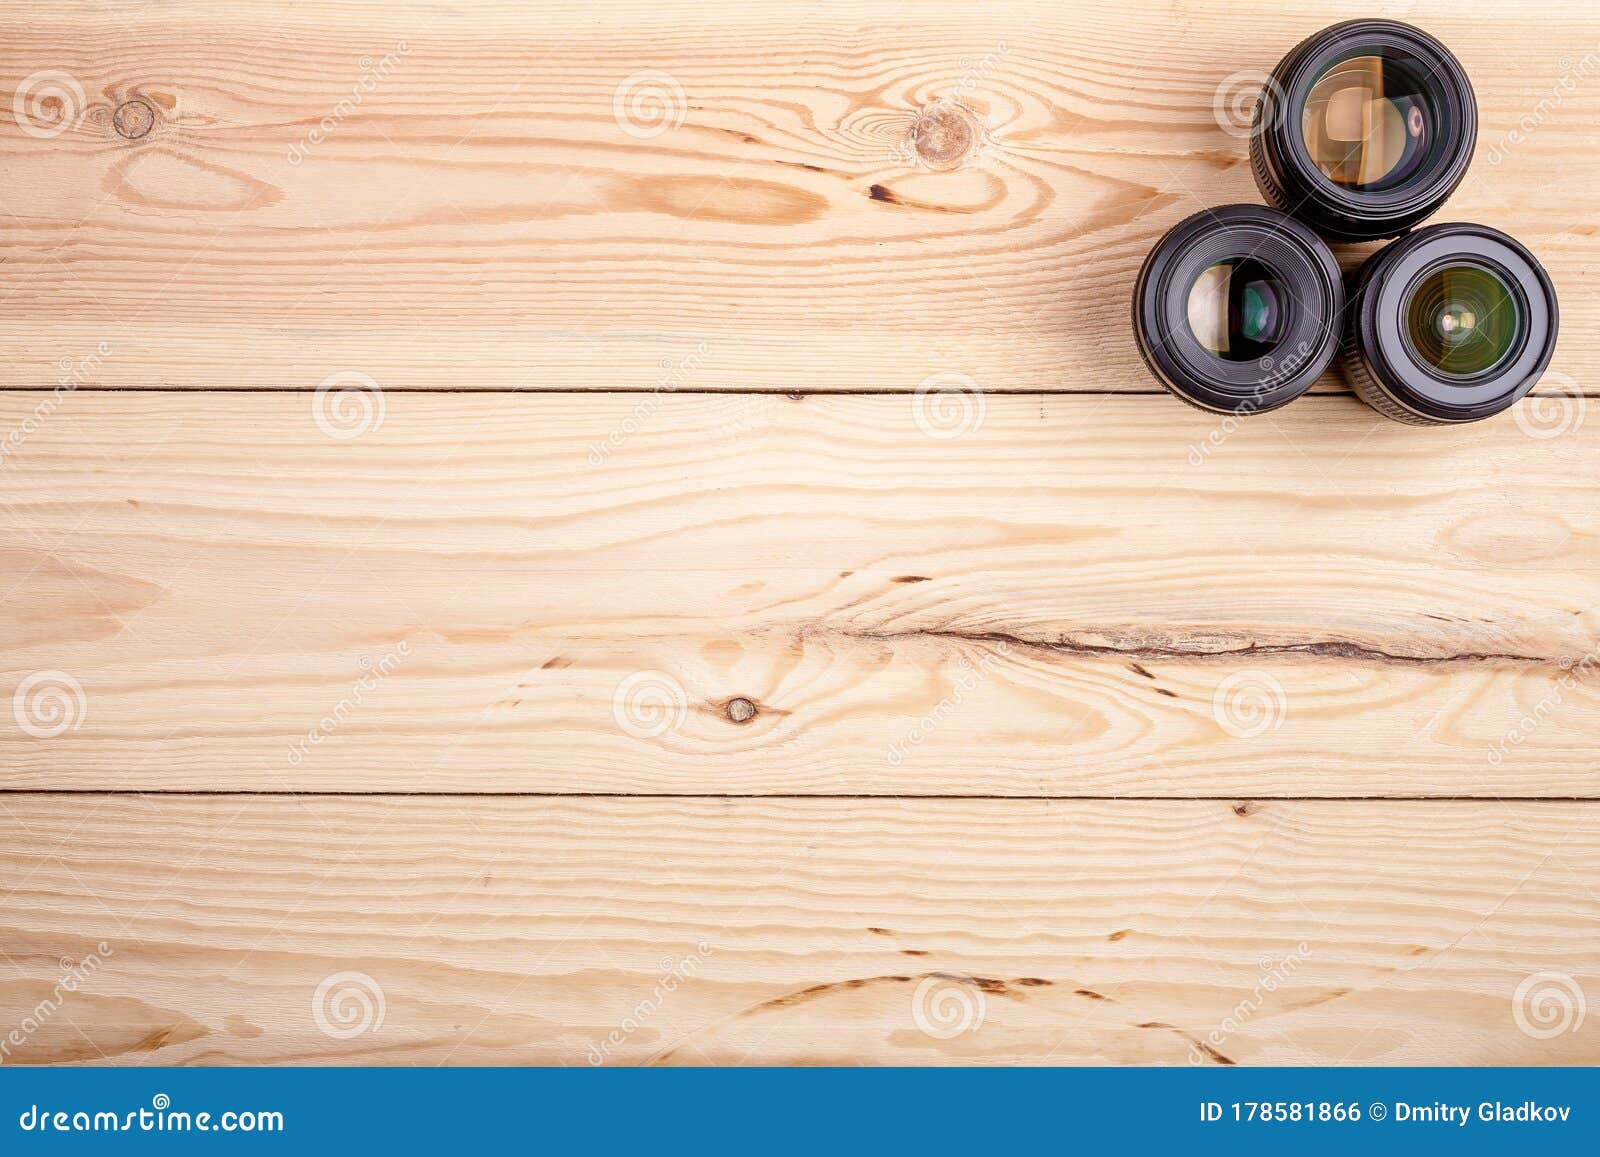 Camera Lenses on Wooden Table Top View. Background and Workspace for  Photography Stock Photo - Image of blank, vintage: 178581866